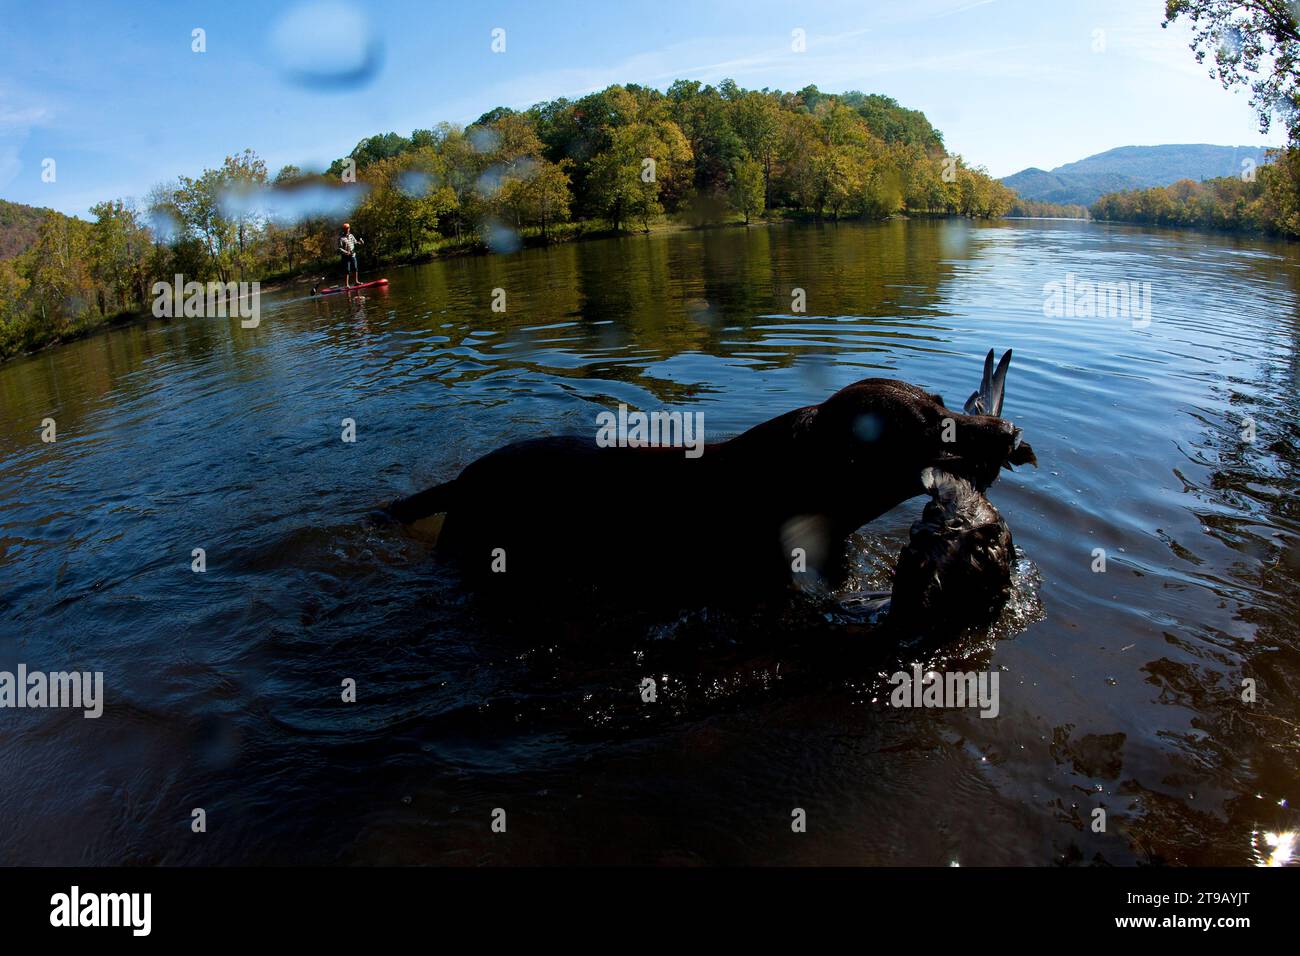 Dog fetching a dead duck from a river with a stand-up paddle boarder in the background. Stock Photo